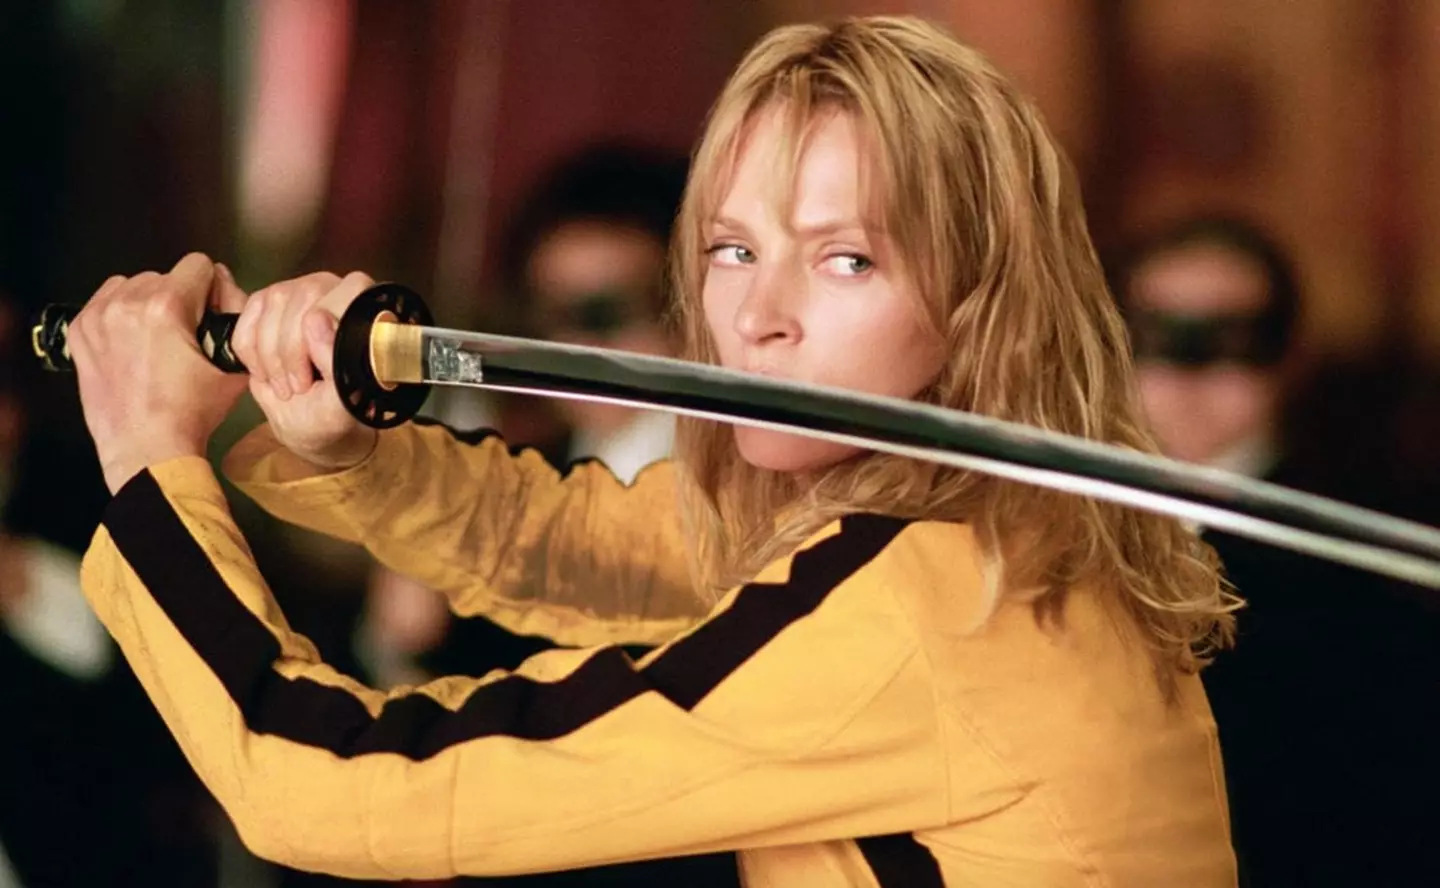 Kill Bill can be watched for free.